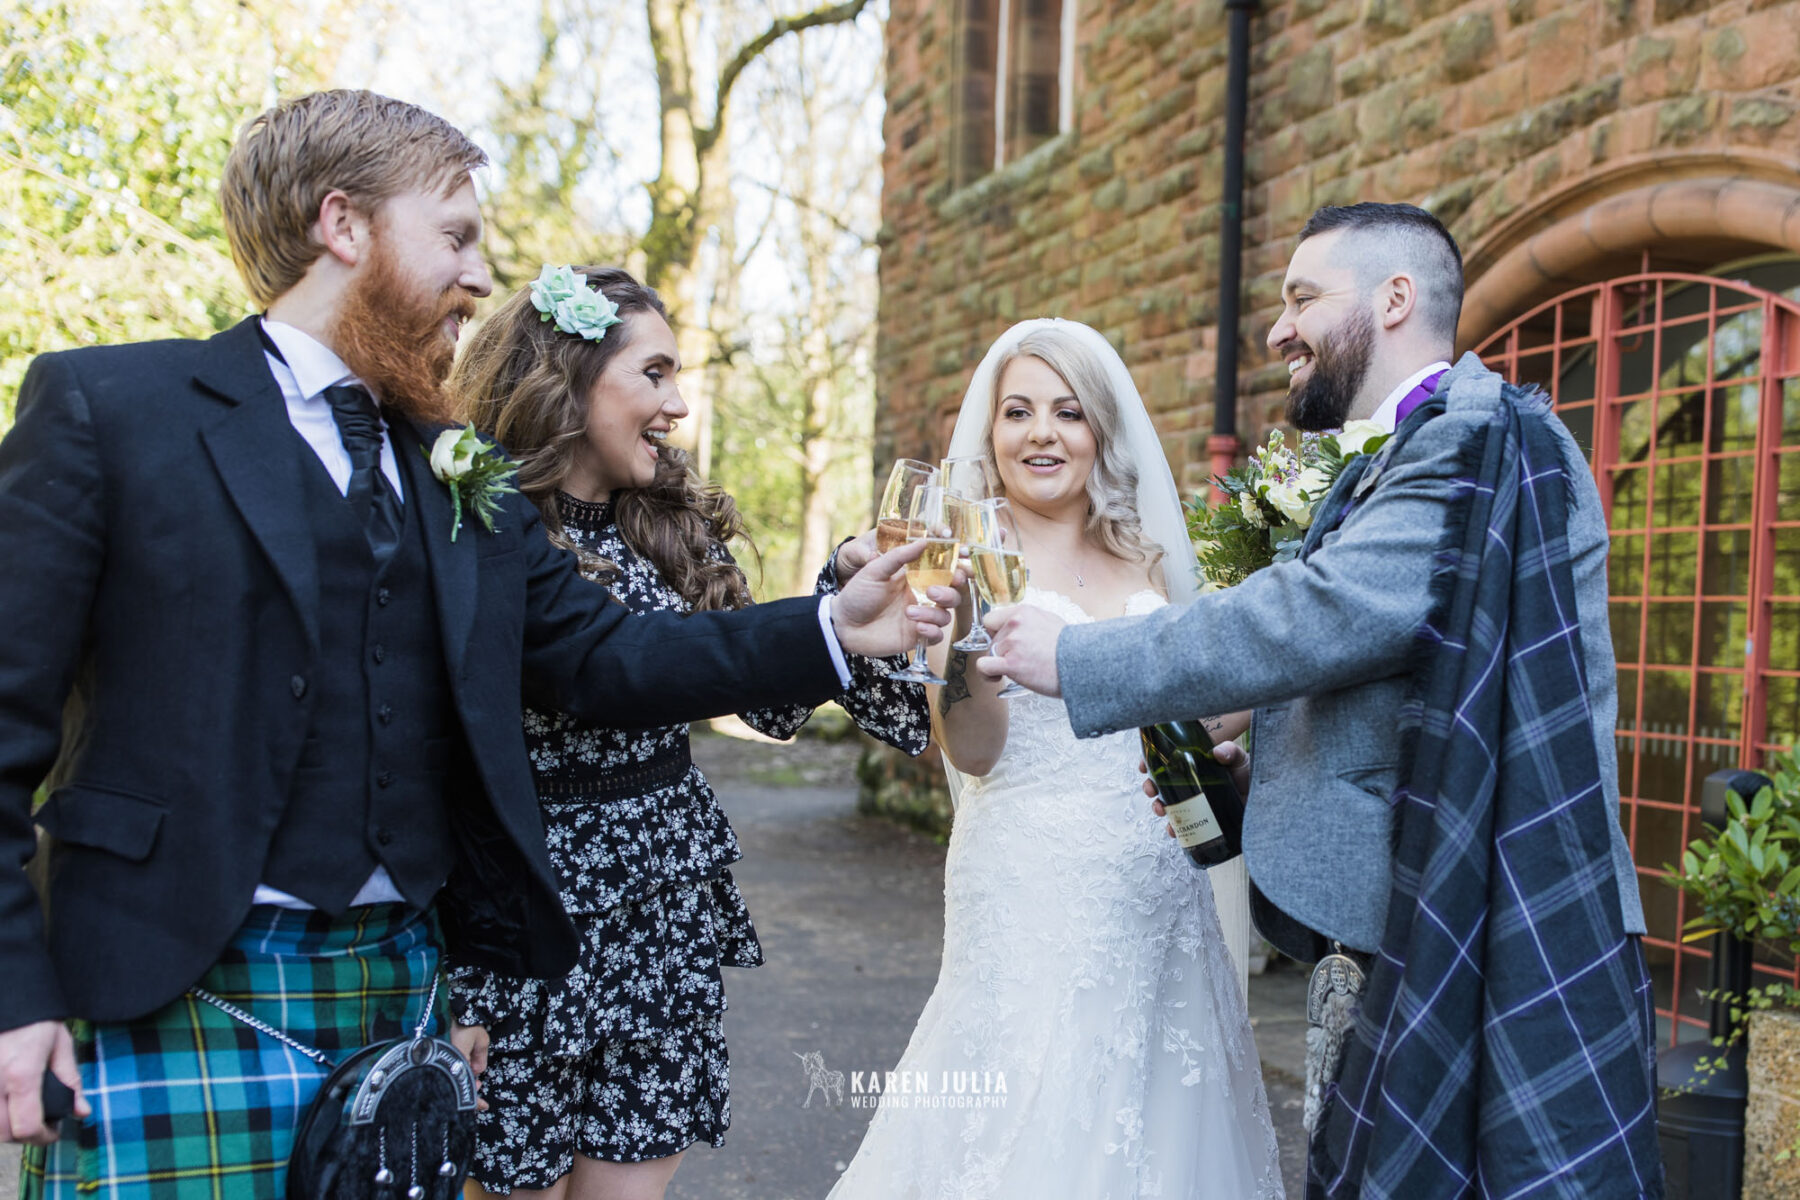 wedding couple and guests enjoy champagne celebration after the wedding ceremony at Pollockshields Burgh Hall